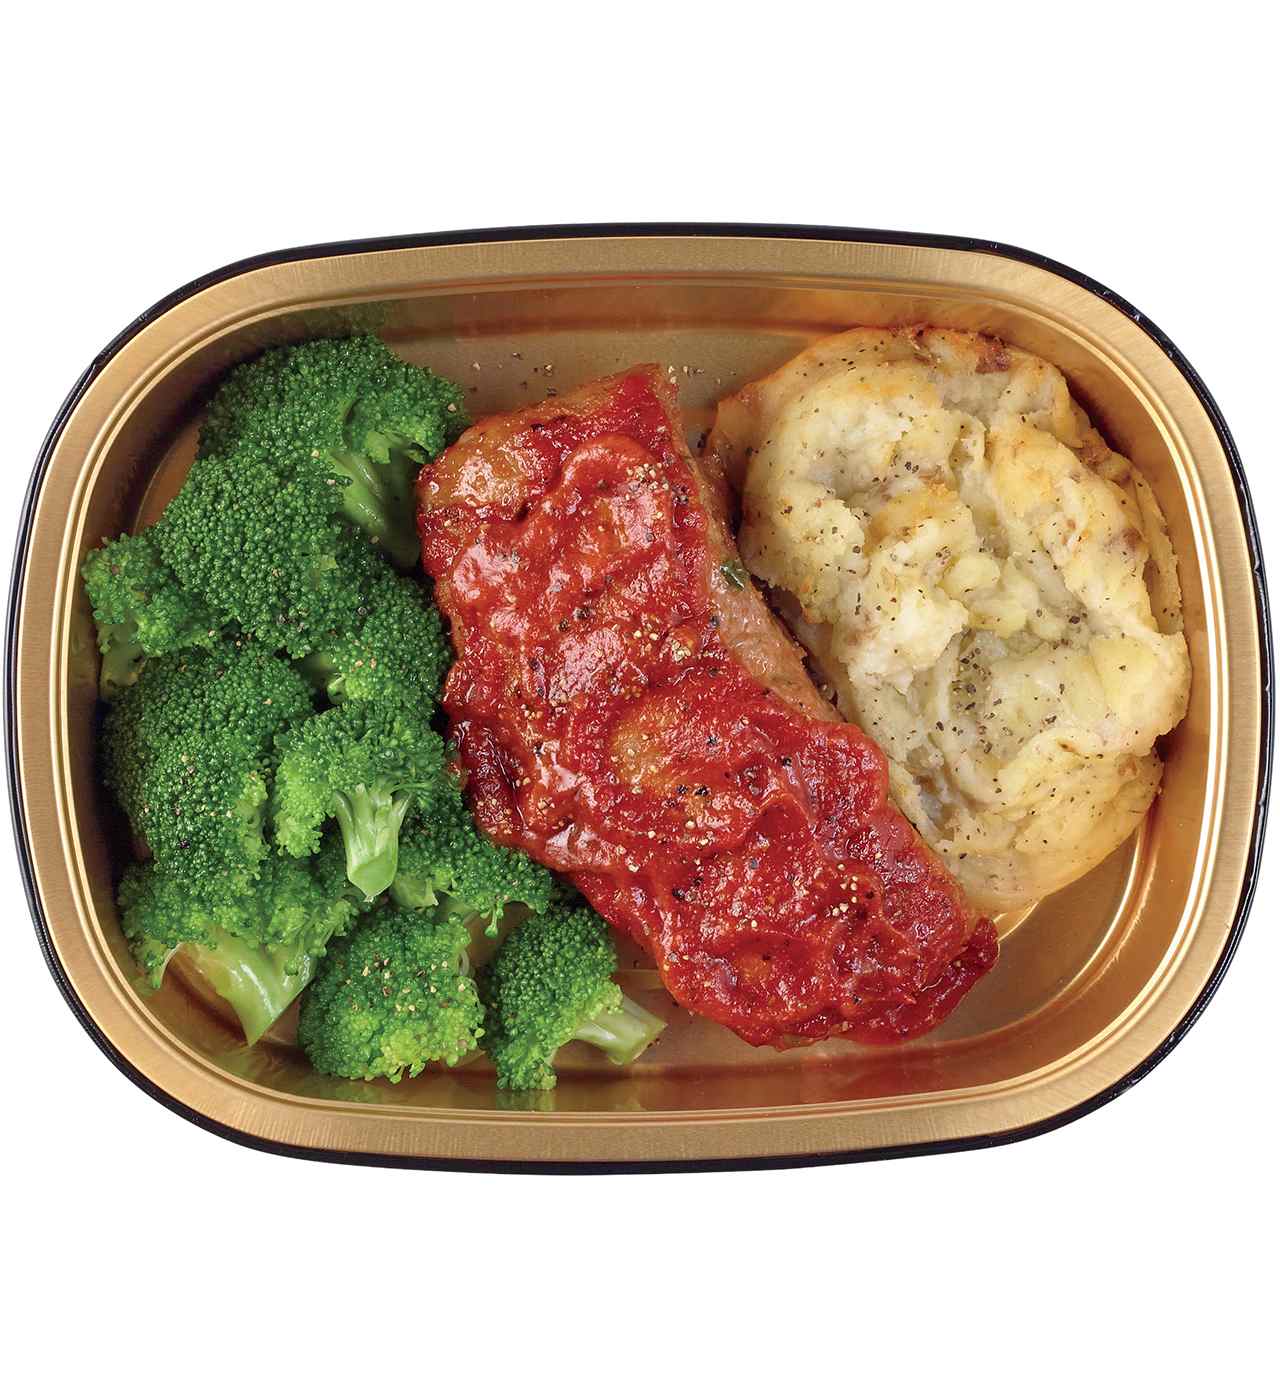 Meal Simple by H-E-B Homestyle Meatloaf with Mashed Potatoes & Broccoli -  Shop Entrees & Sides at H-E-B